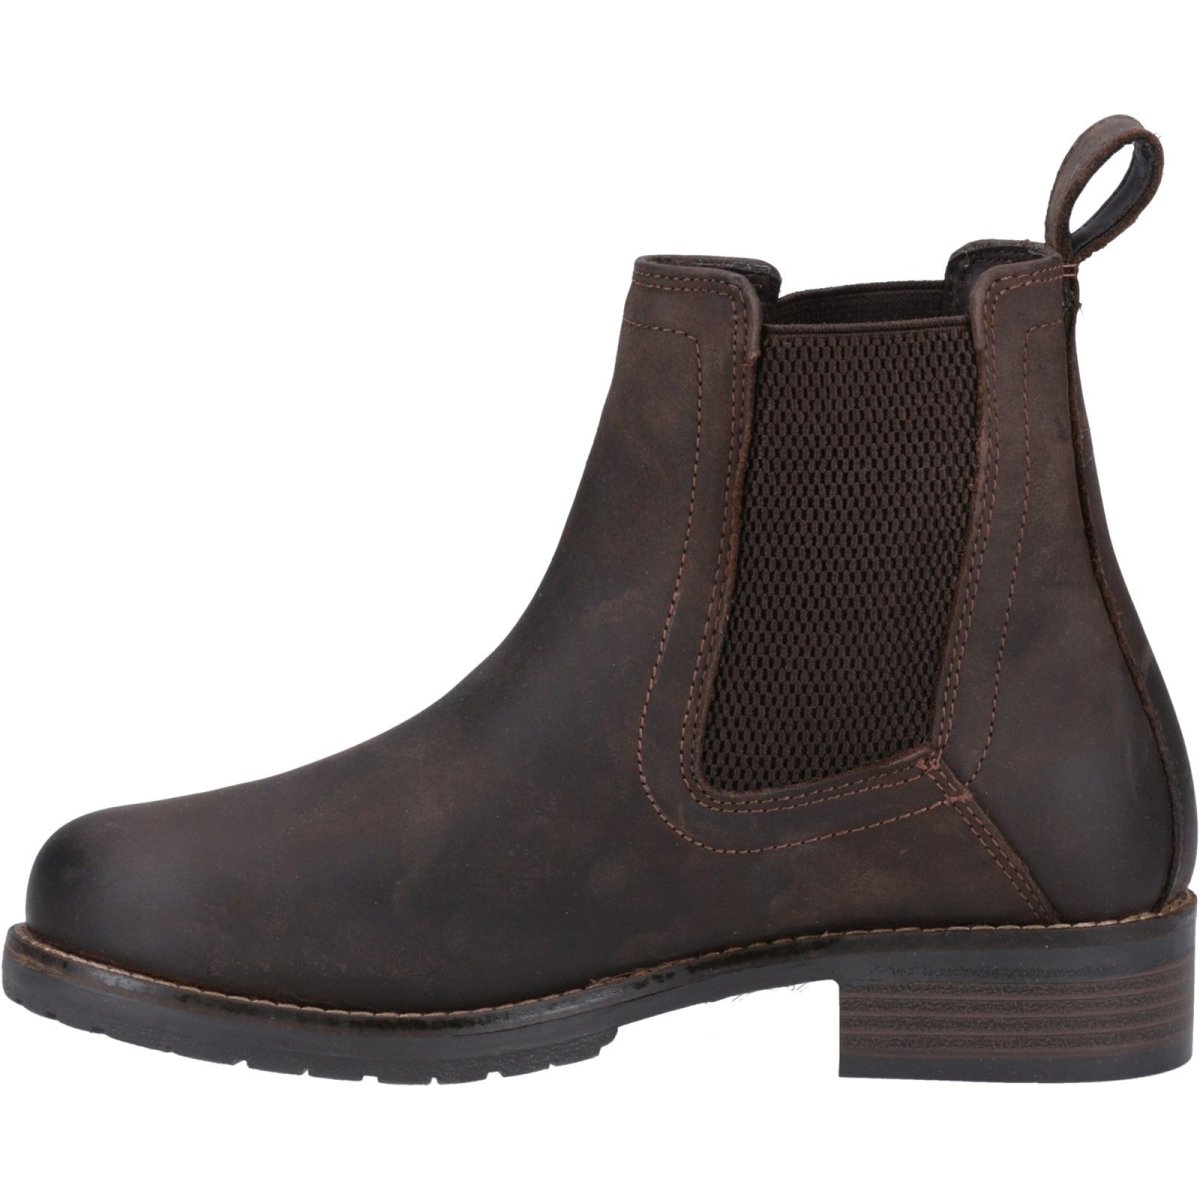 Cotswold Enstone Country Chelsea Boots - Shuzes